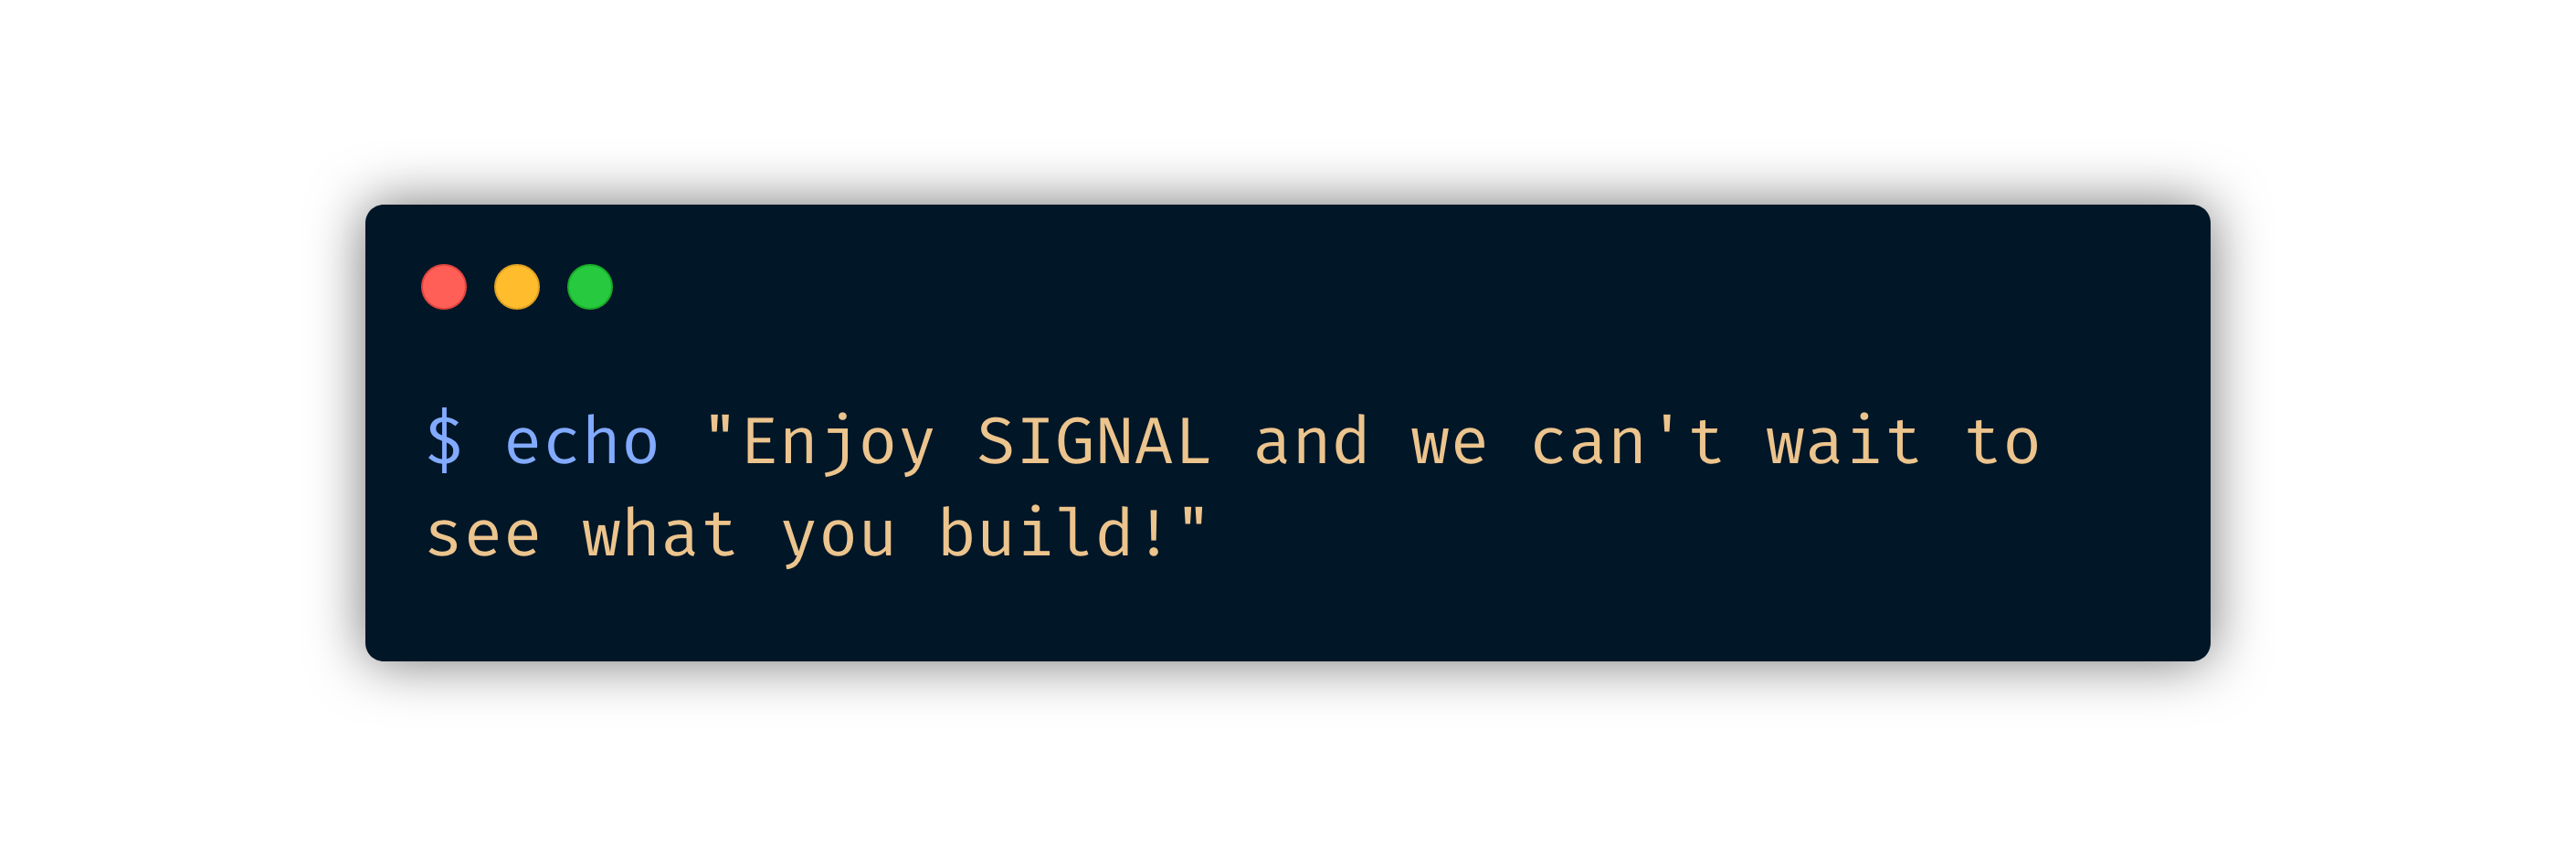 Screenshot of terminal saying "echo Enjoy SIGNAL and we can&#x27;t wait to see what you build!"